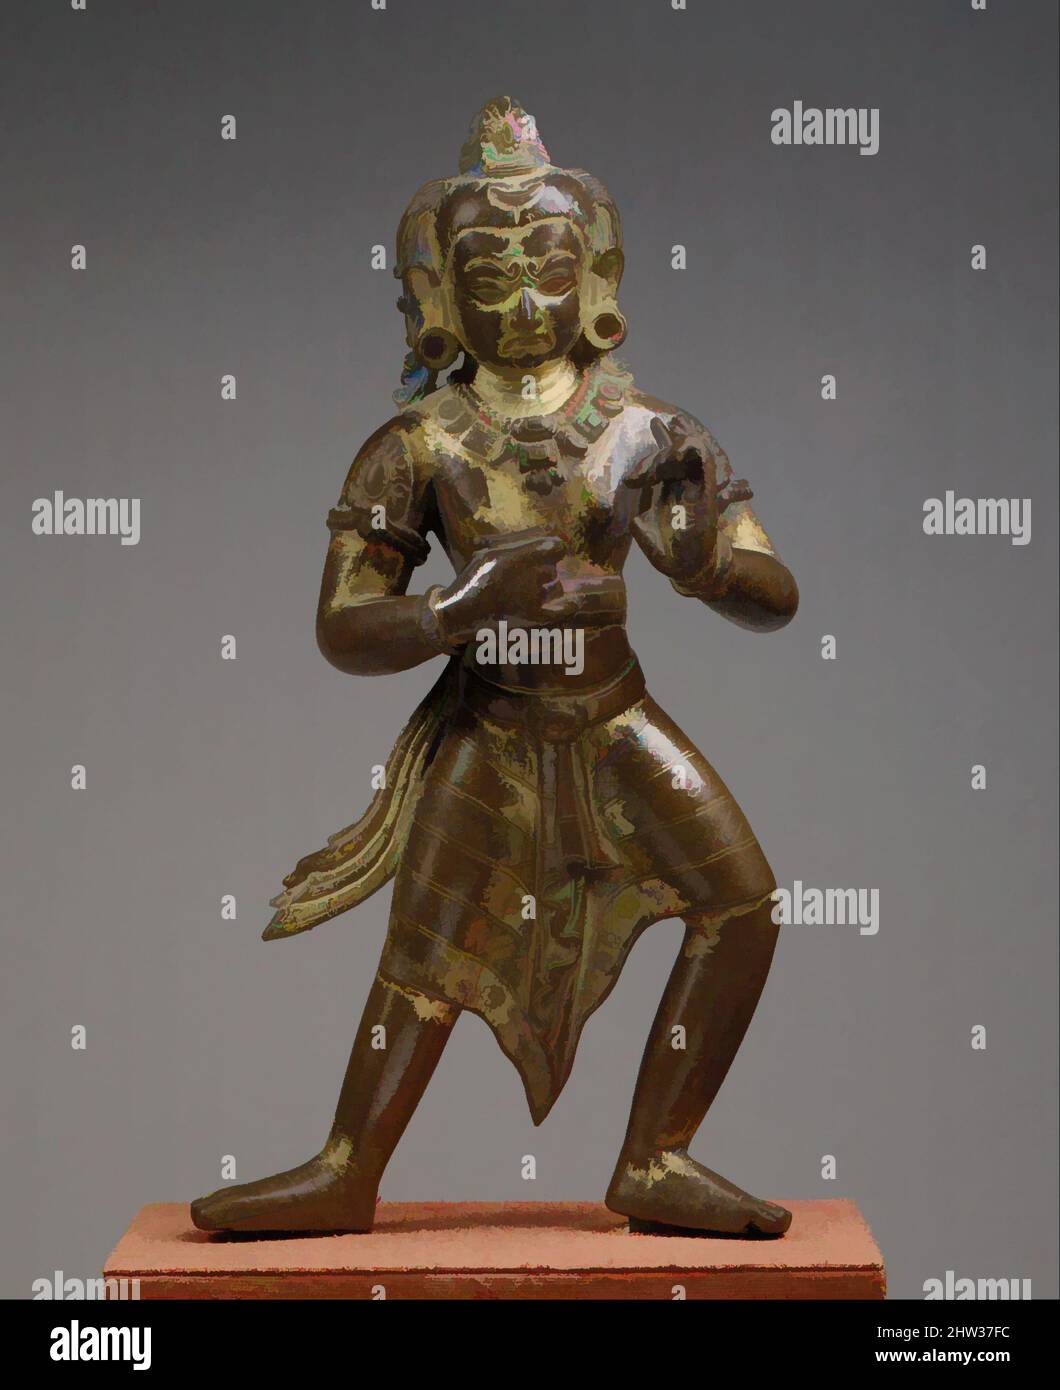 Art inspired by Manjushri, the Bodhisattva of Transcendent Wisdom, in an Awesome Aspect, Thakuri period, 10th century, Nepal (Kathmandu Valley), Gilt-copper alloy with color and gold paint, H. 12 1/2 in. (31.8 cm); H. incl. base 14 1/4 in. (36.2 cm); W. 6 1/4 in. (15.9 cm); D. 3 1/4 in, Classic works modernized by Artotop with a splash of modernity. Shapes, color and value, eye-catching visual impact on art. Emotions through freedom of artworks in a contemporary way. A timeless message pursuing a wildly creative new direction. Artists turning to the digital medium and creating the Artotop NFT Stock Photo